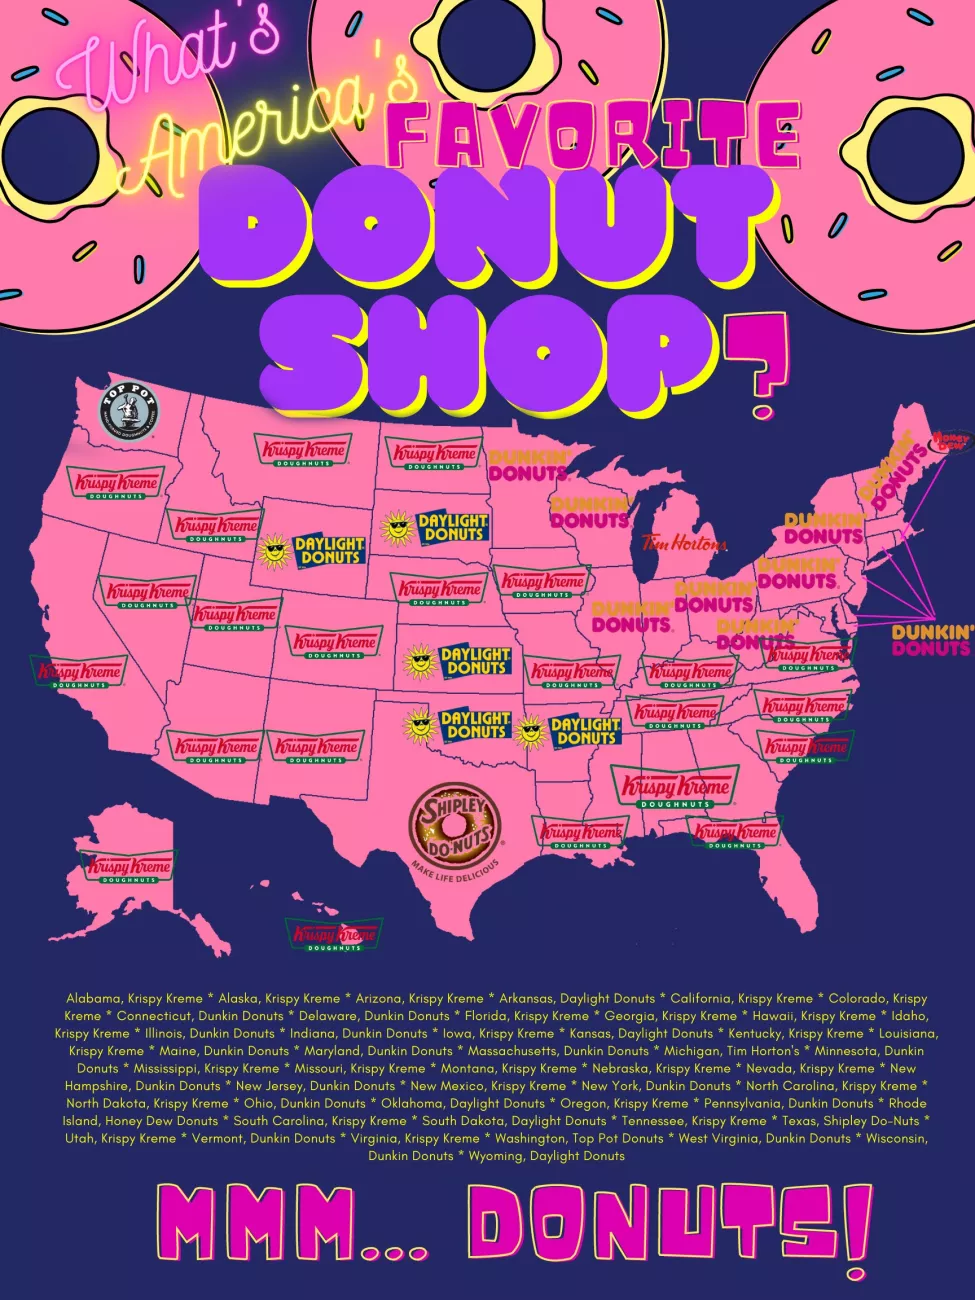 What’s America’s Favorite Donut Shop?